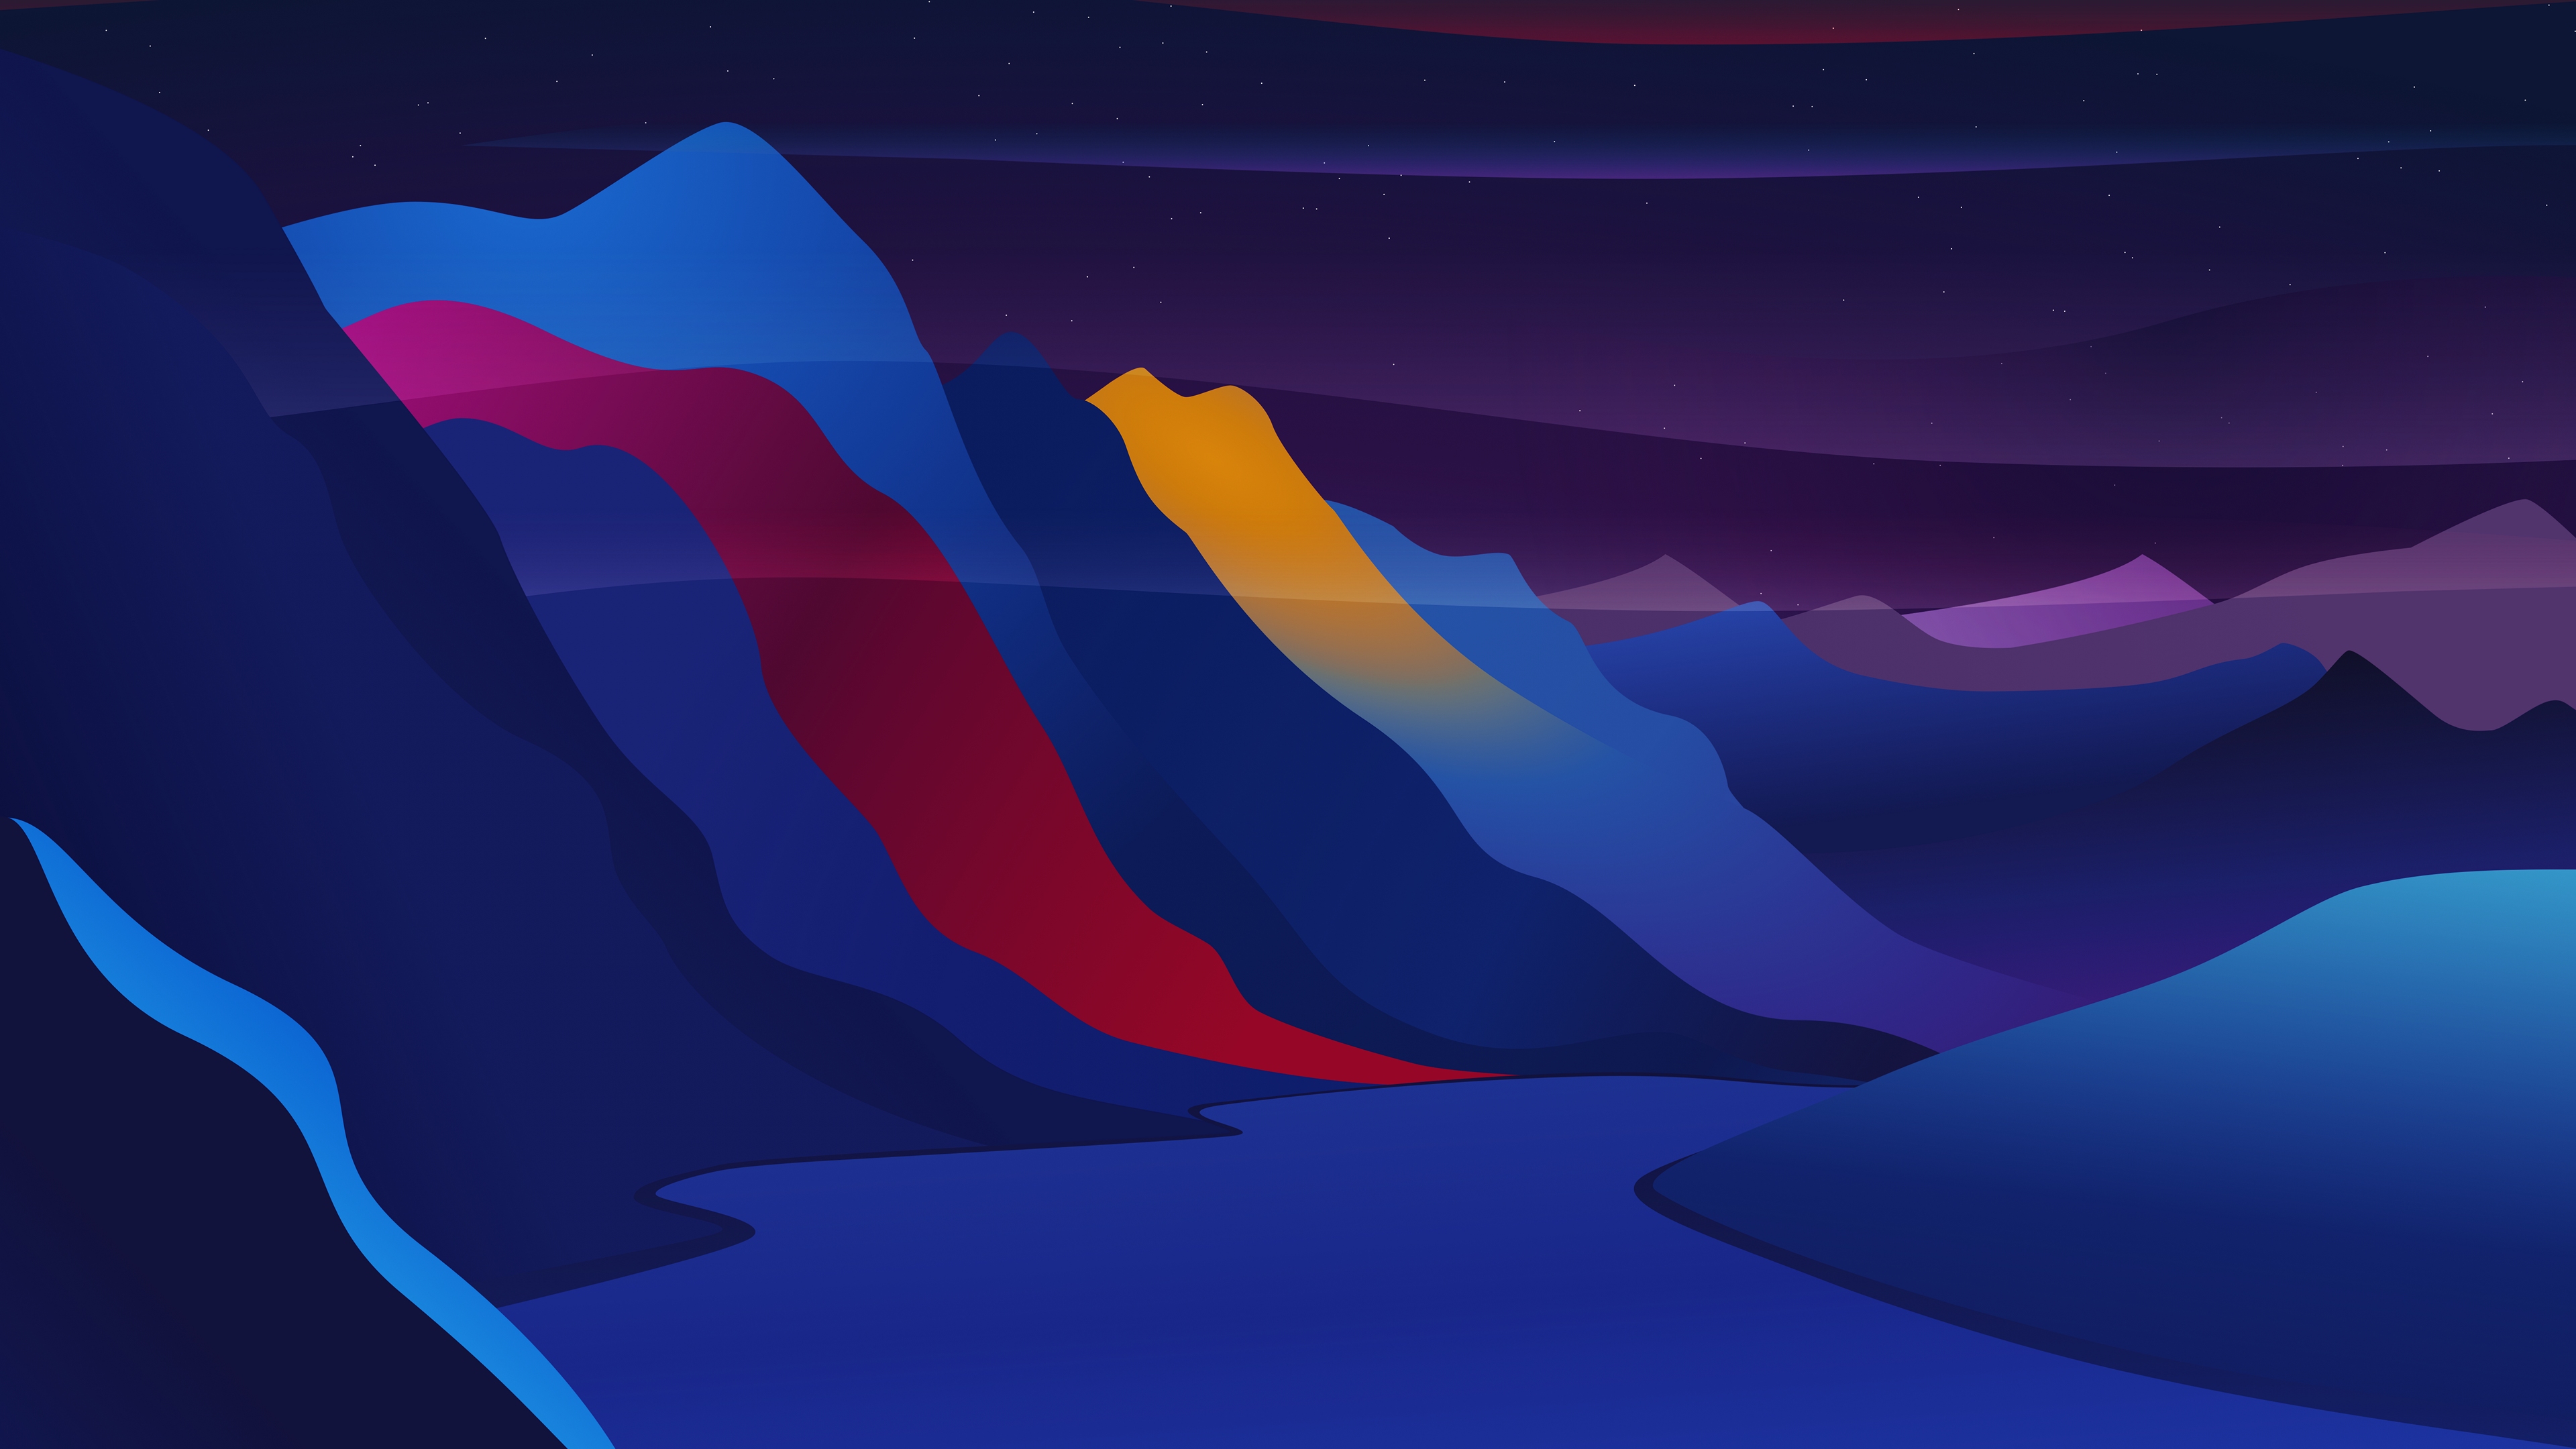 A drawing of colorful mountains with a river